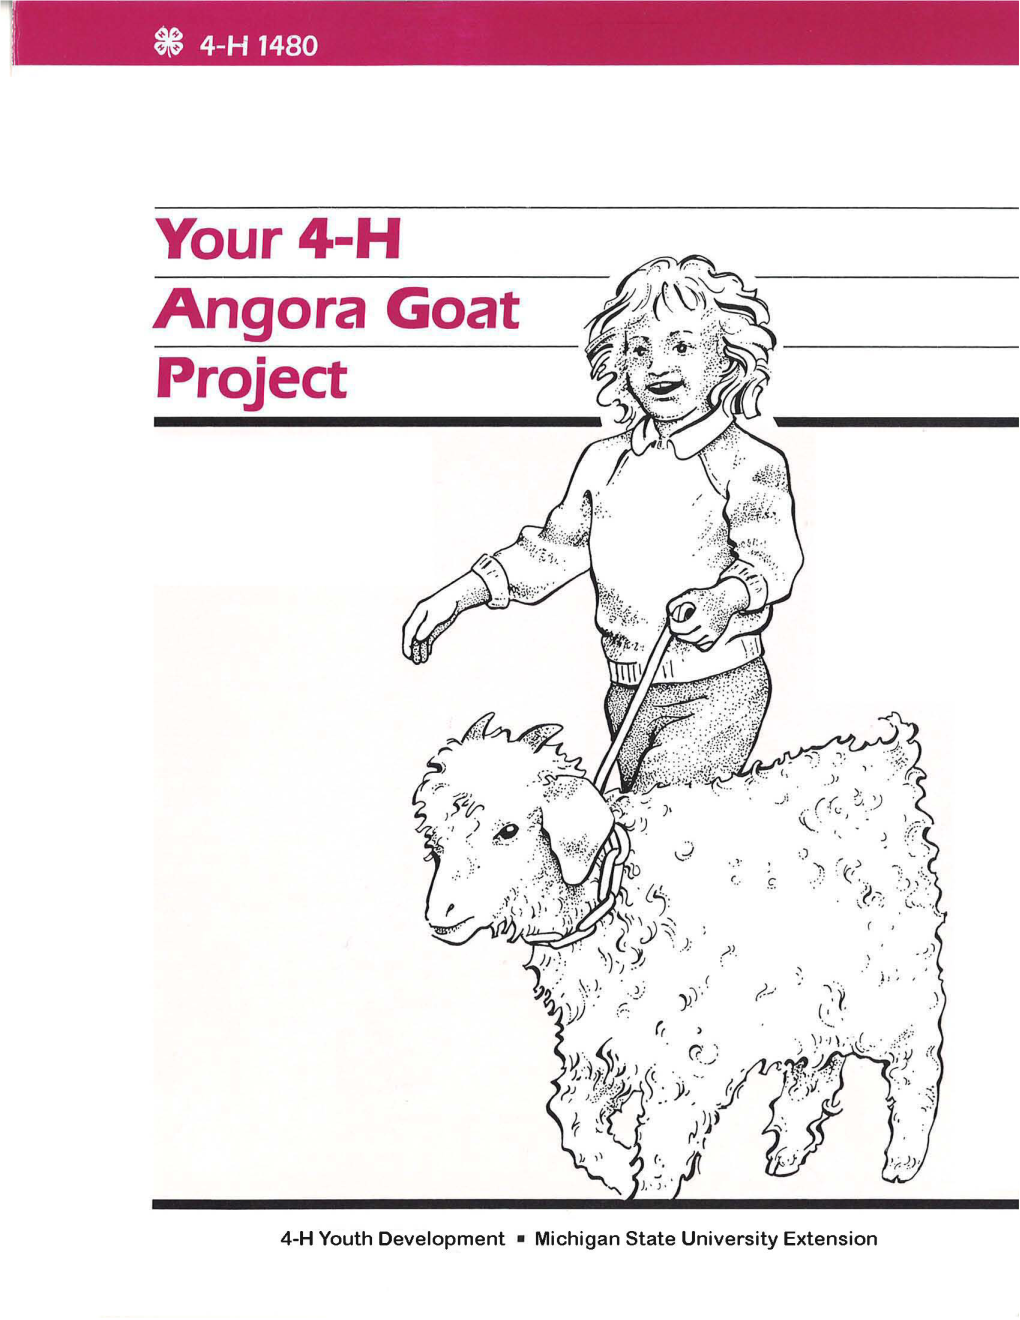 4-H 1480 Your 4-H Angora Goat Project